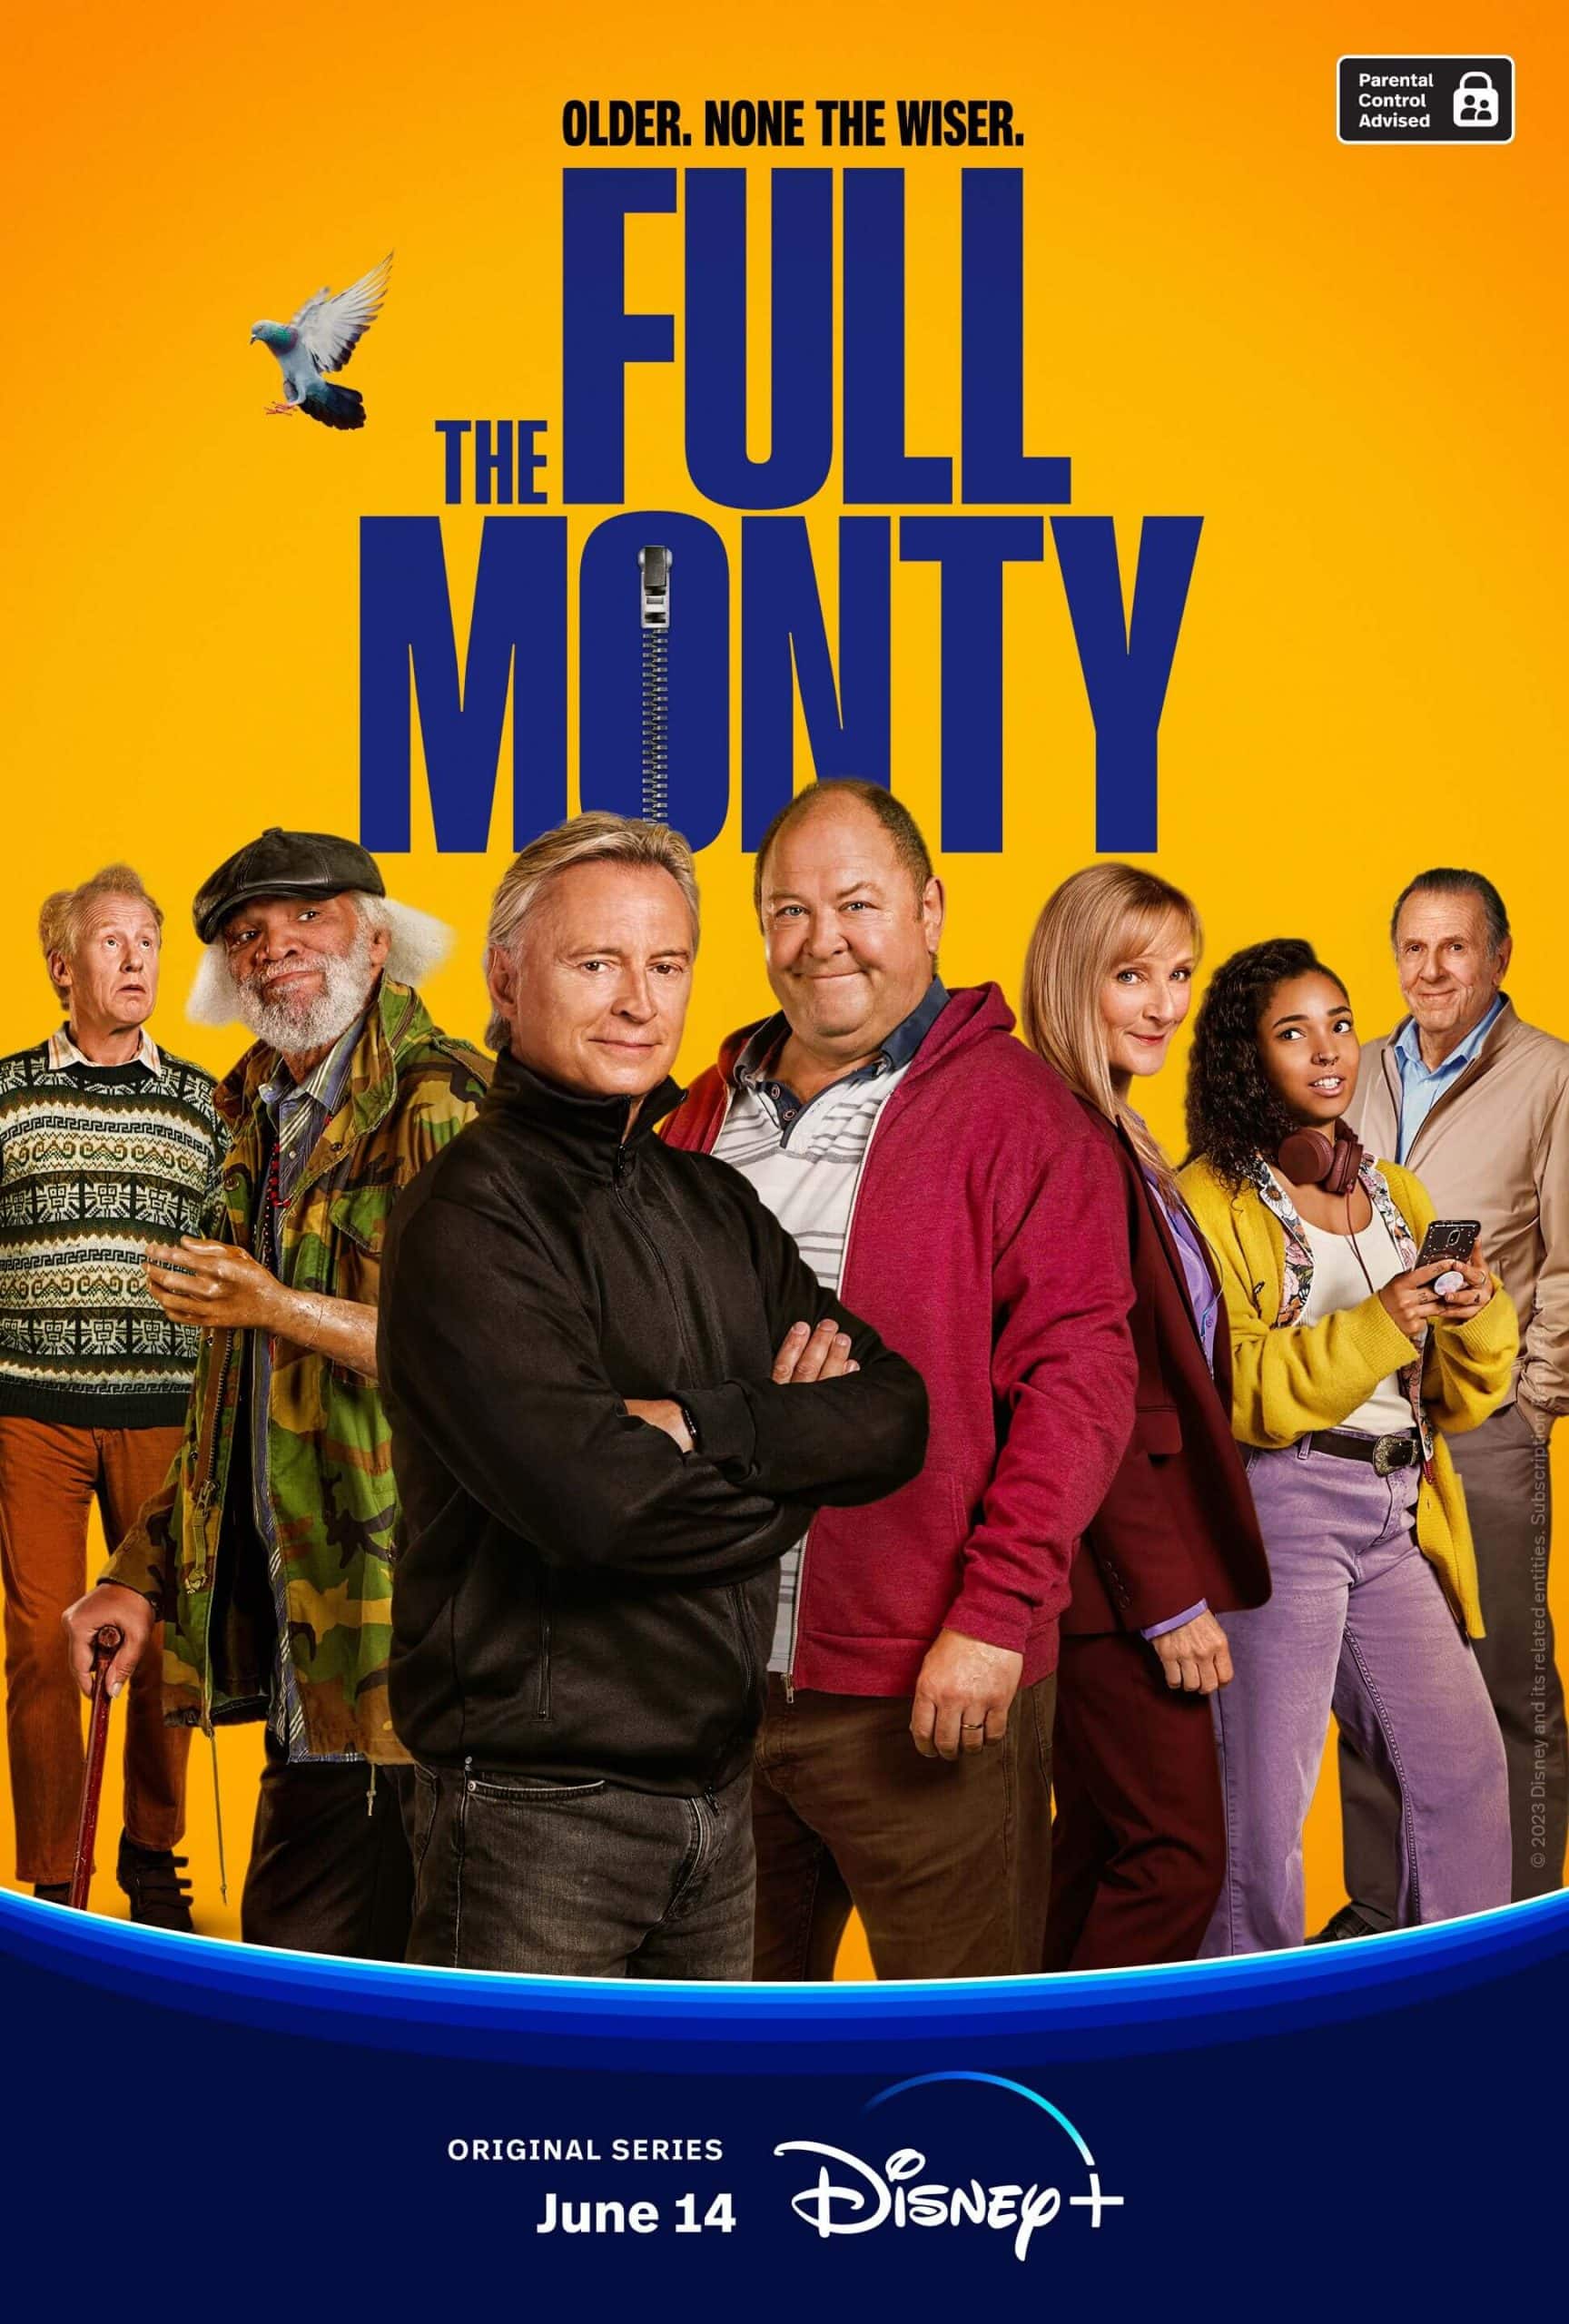 How To Watch “The Full Monty” Series What's On Disney Plus